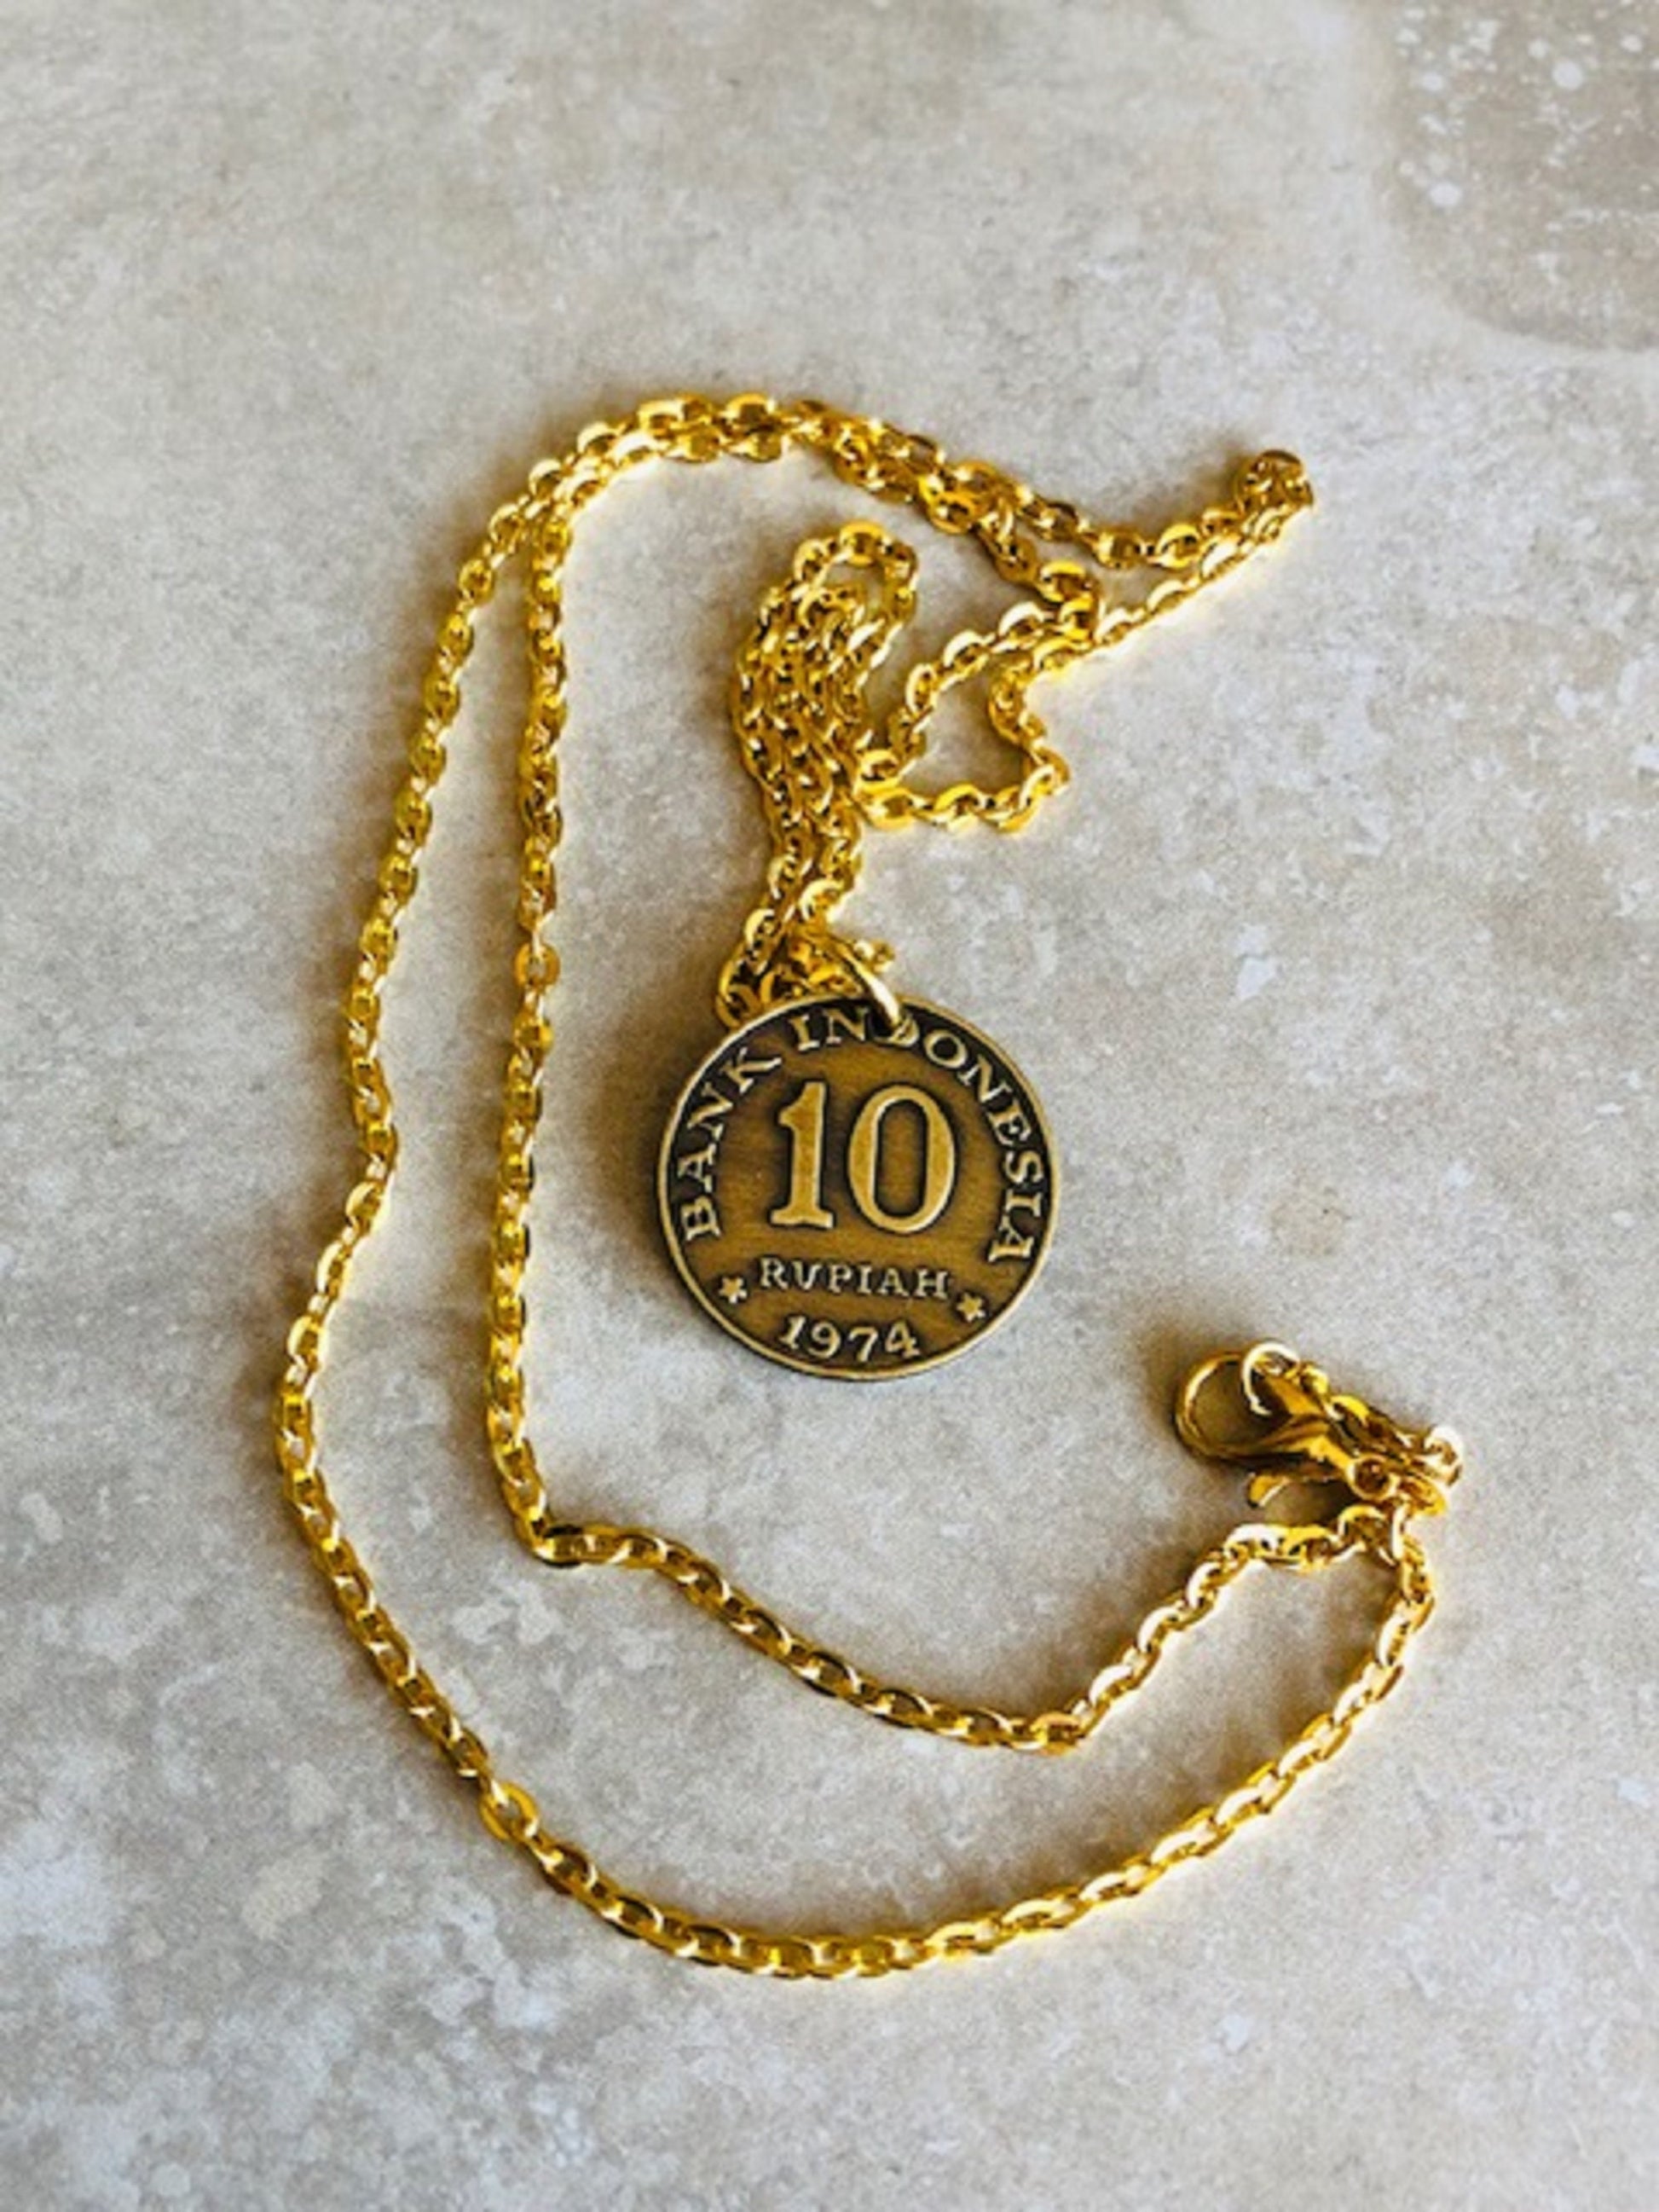 Indonesia Coin 10 Rupiah Necklace Coin Jewelry Pendant Vintage Custom Made Rare coins - Coin Enthusiast Fashion Accessory